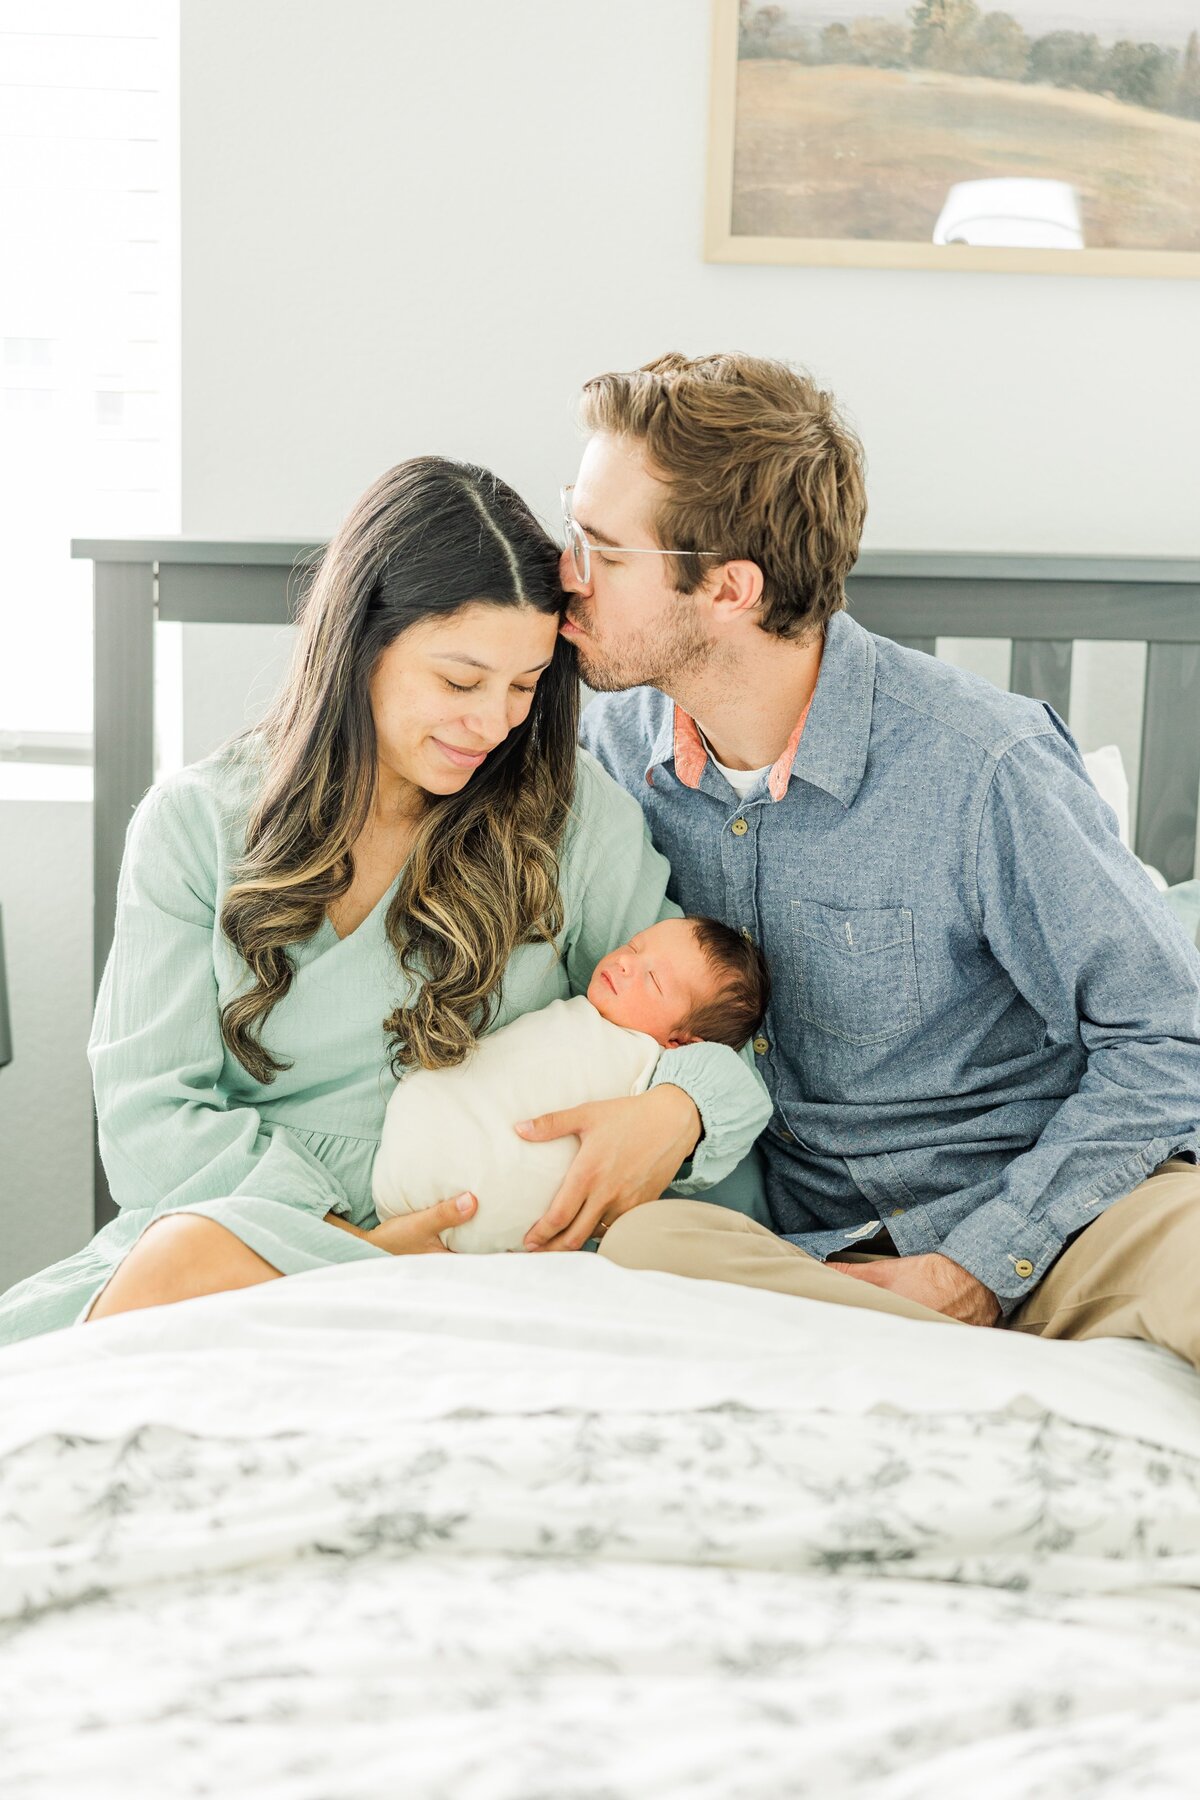 dad kisses wife while snuggling on bed for in-home newborn session